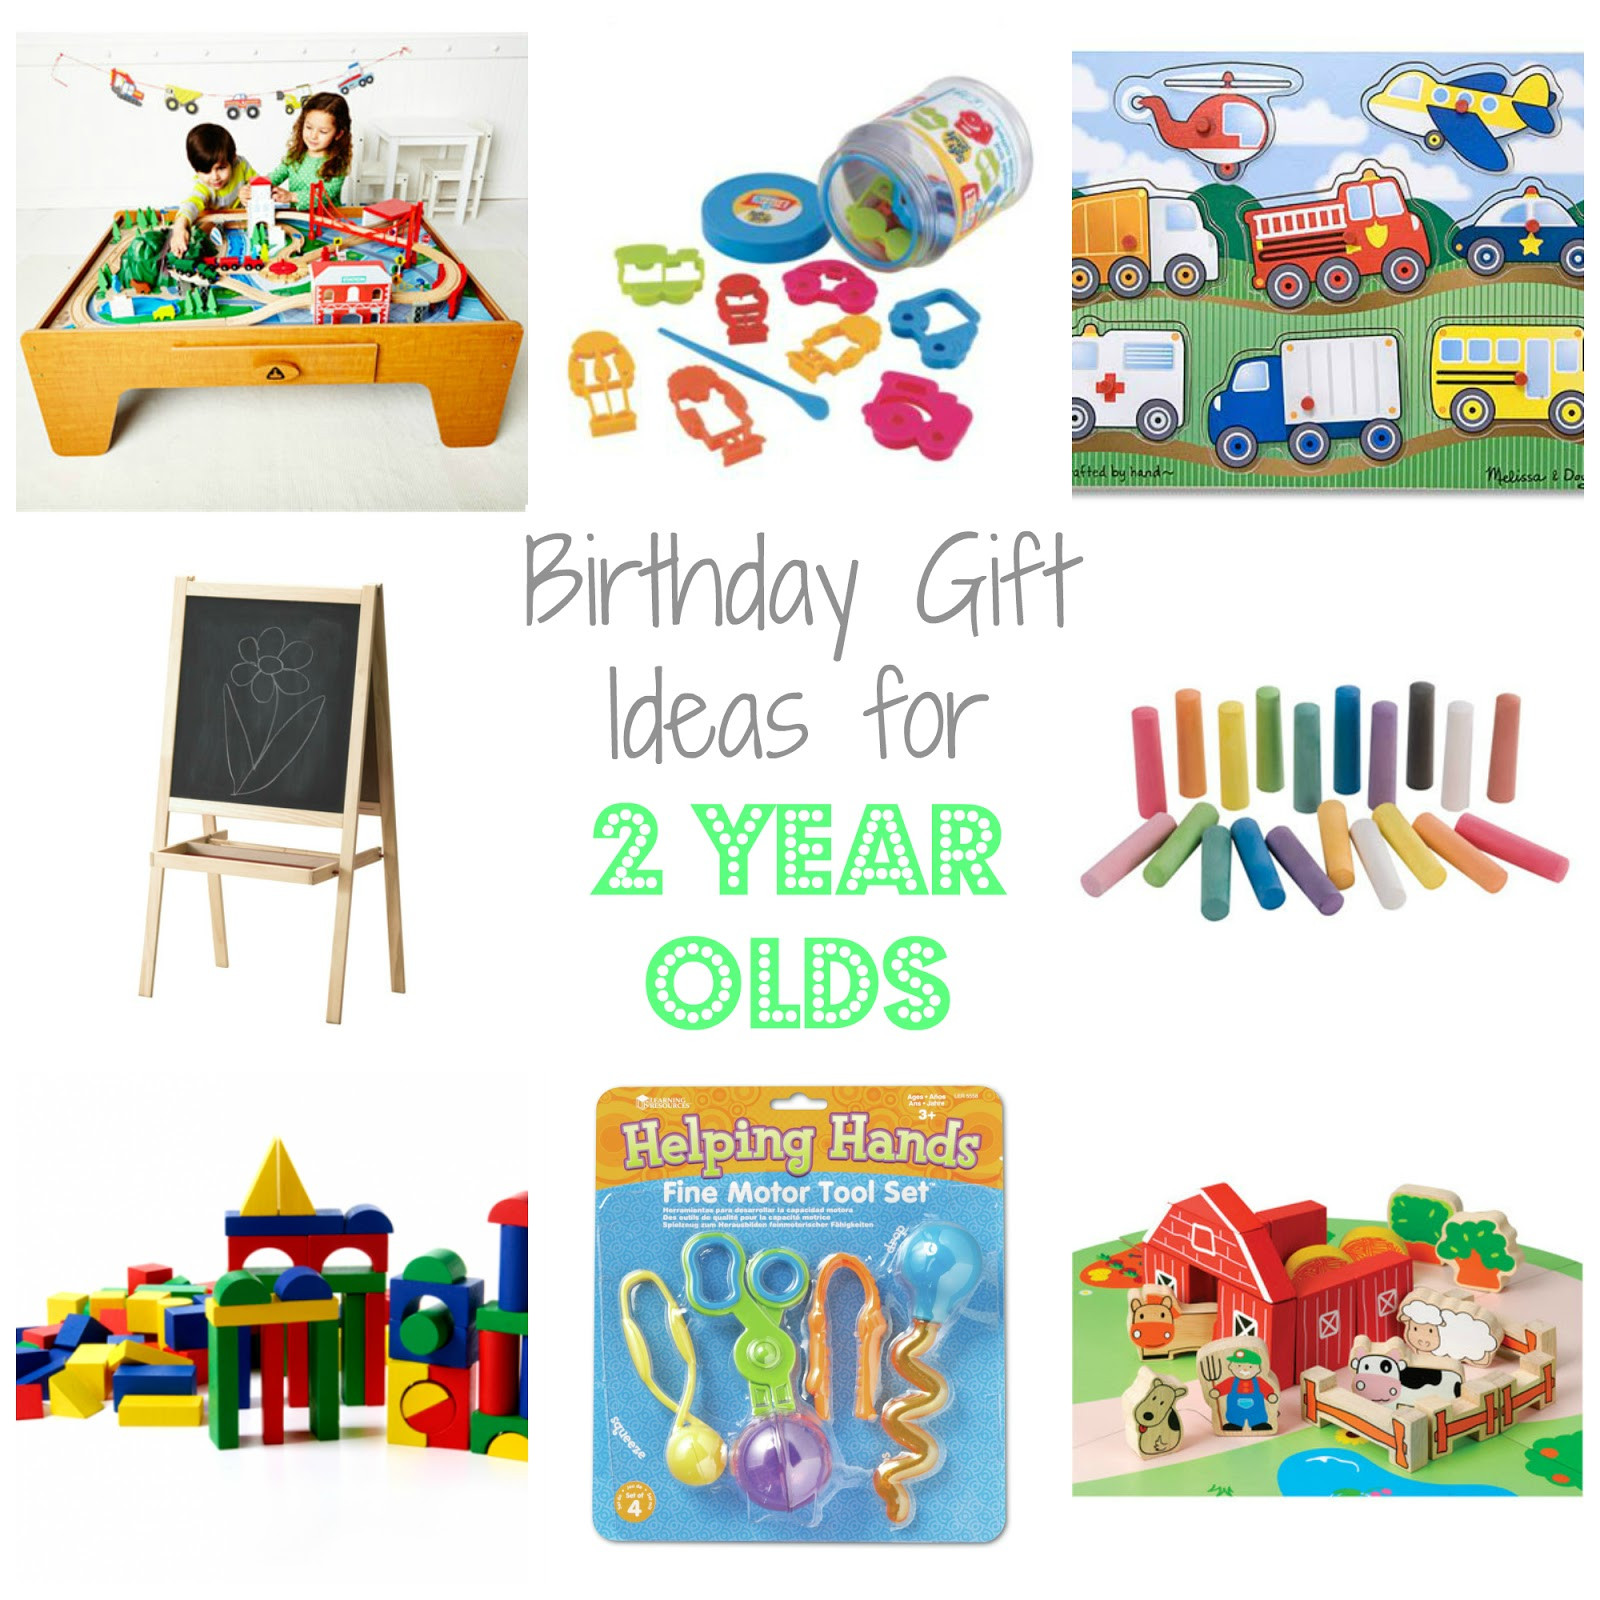 2 Year Old Birthday Gift
 Birthday Gift Ideas for Two Year Olds